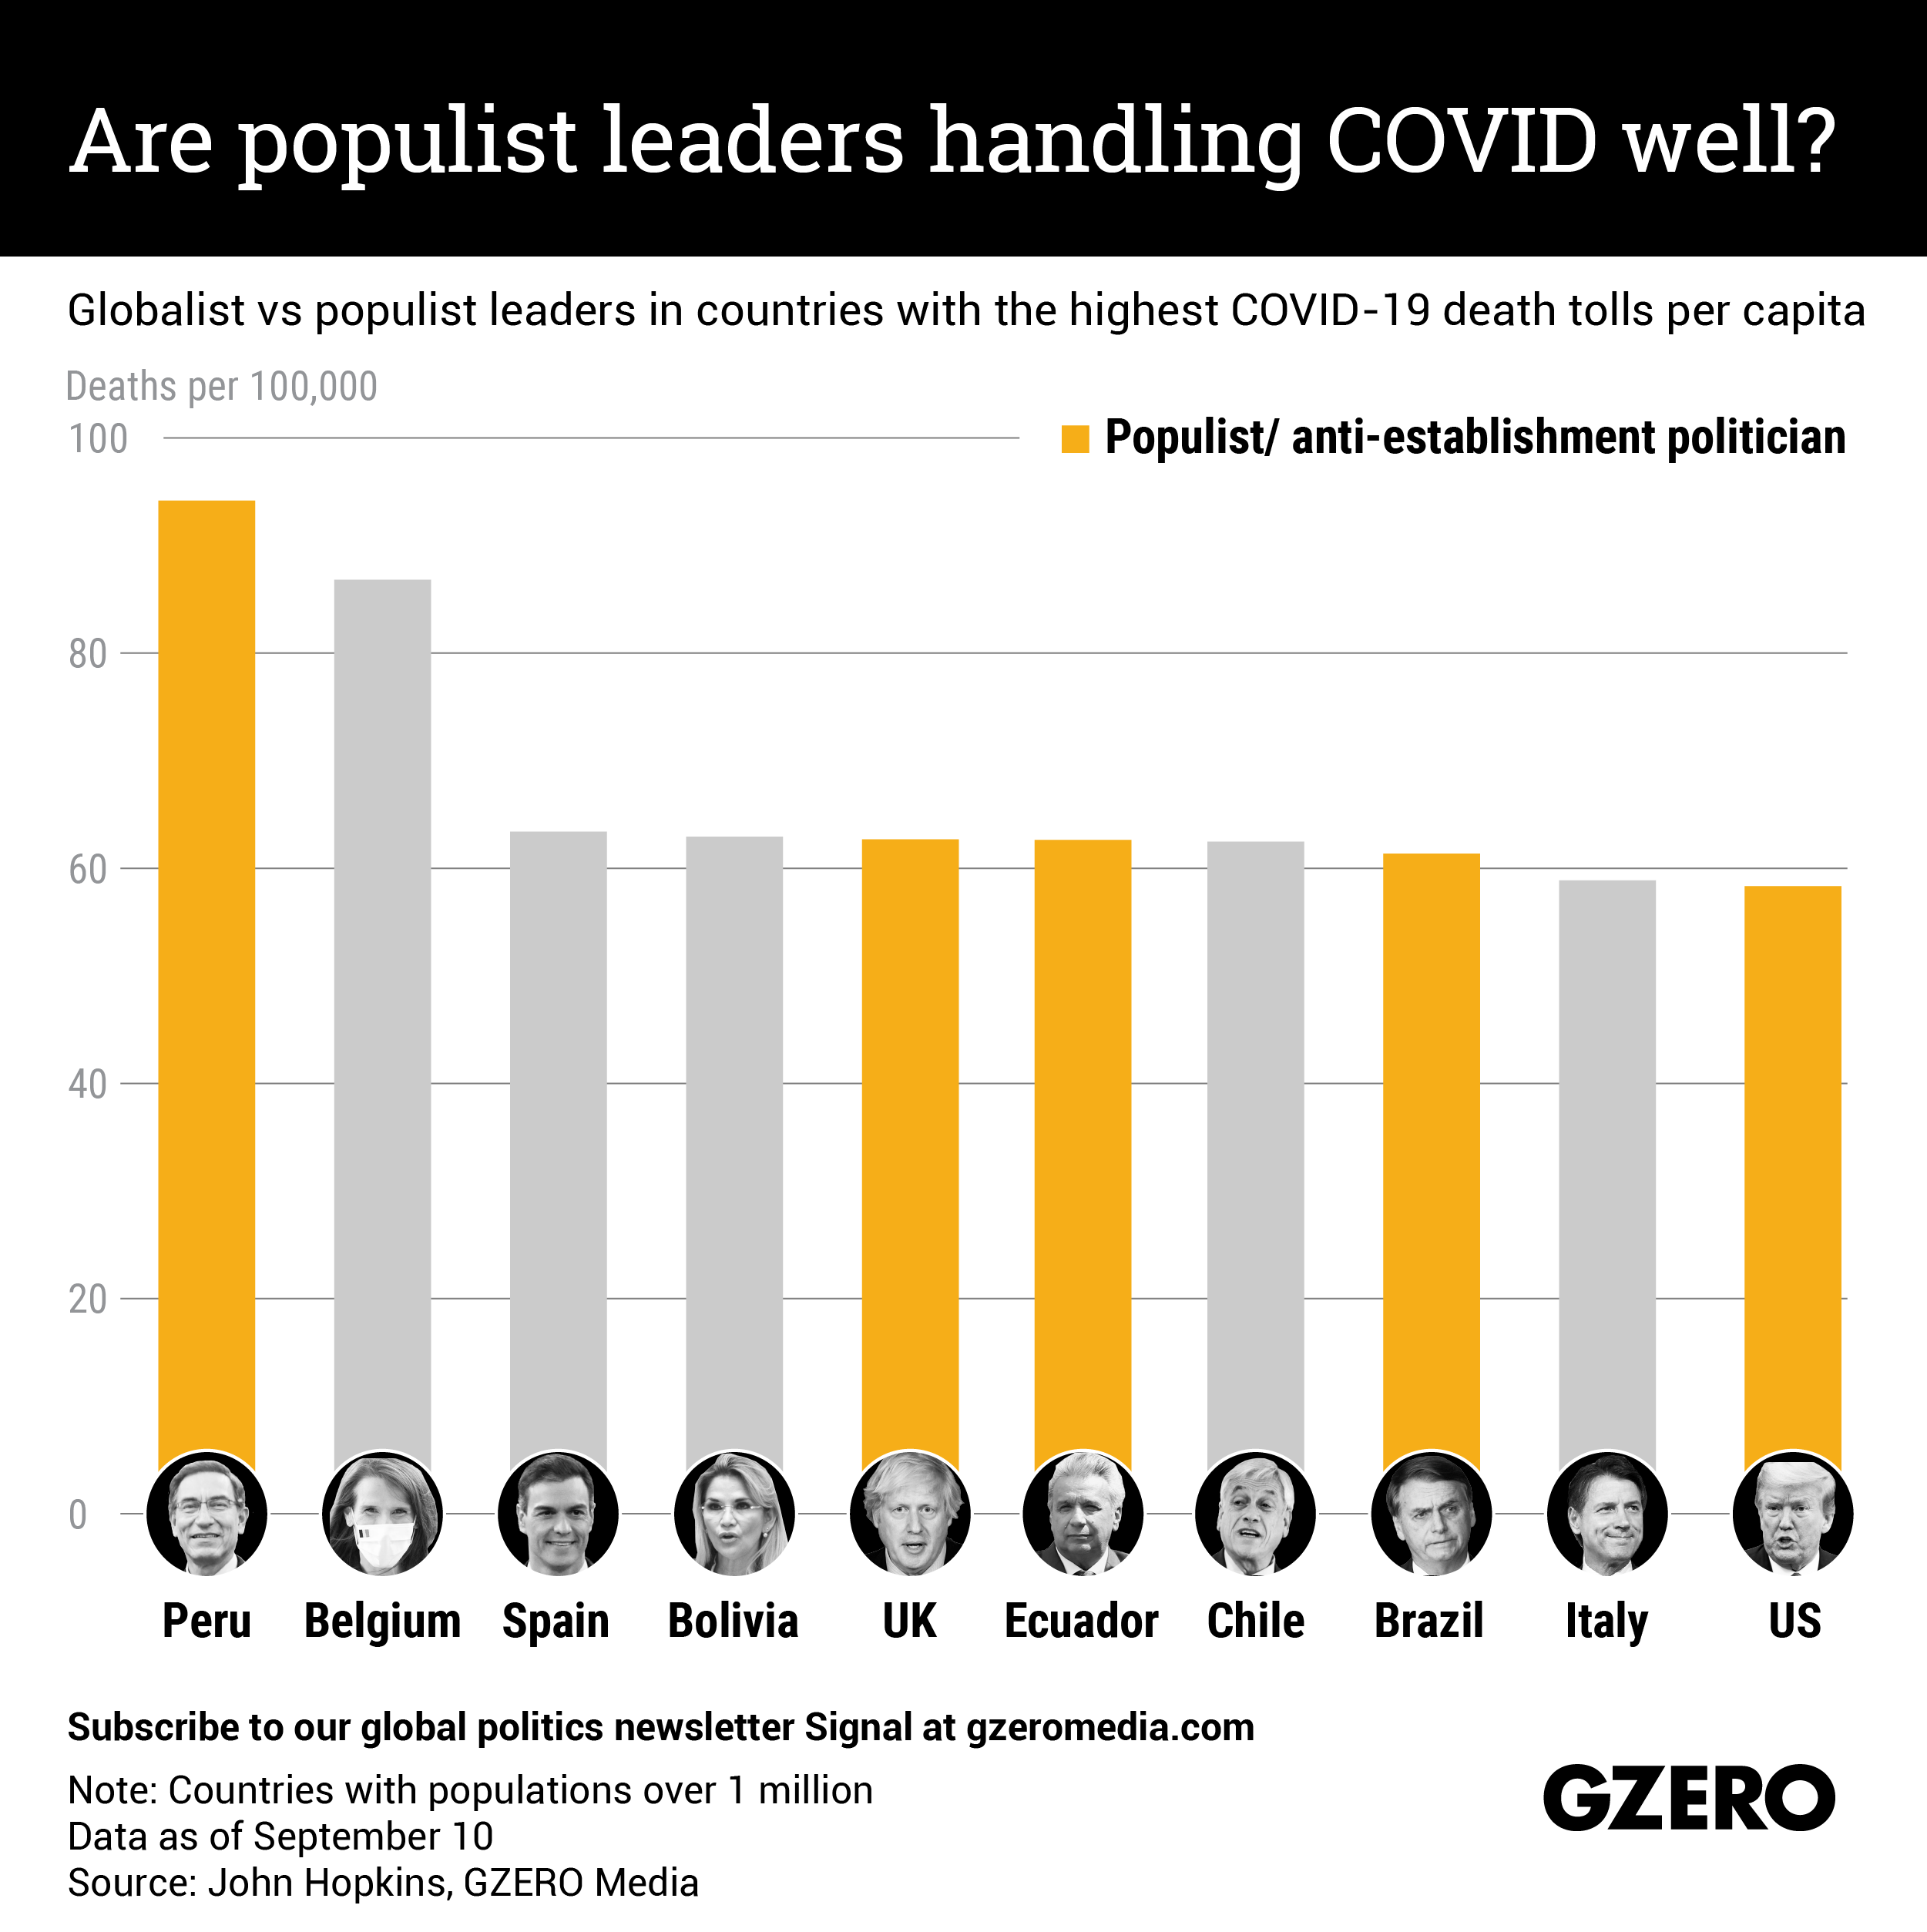 The Graphic Truth: Are populist leaders handling COVID well?